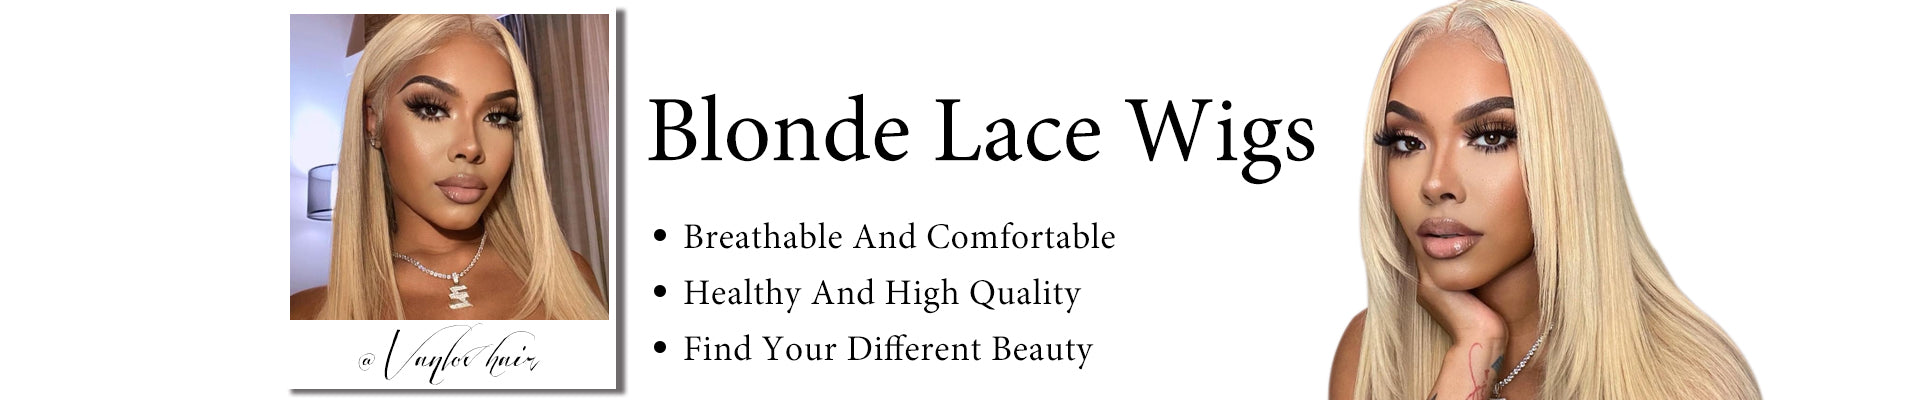 Blonde Lace Wigs
Breathable And ComfortableHealthy And High QualityFind Your Different Beauty